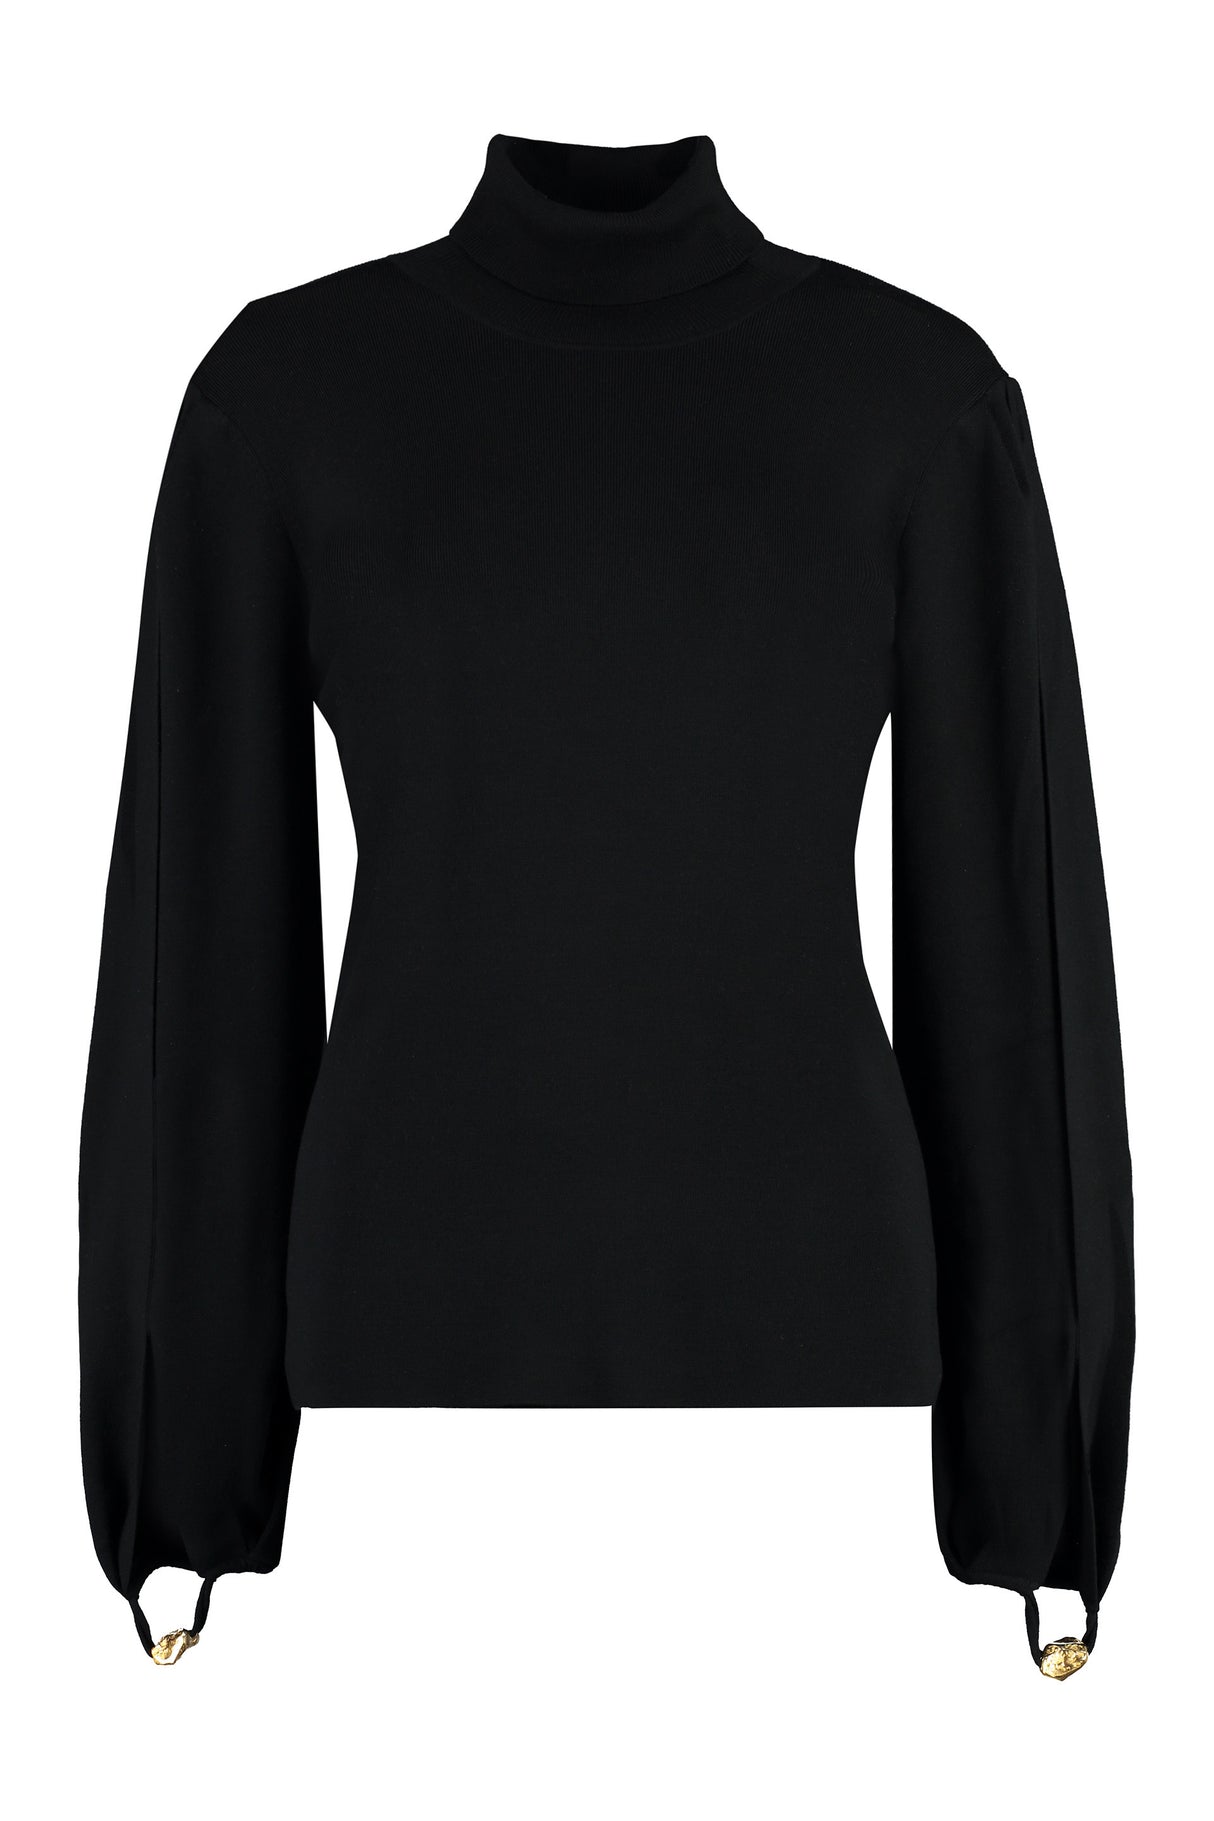 CHLOÉ Black Turtleneck Pullover with Open Sleeves and Embellished Details for Women